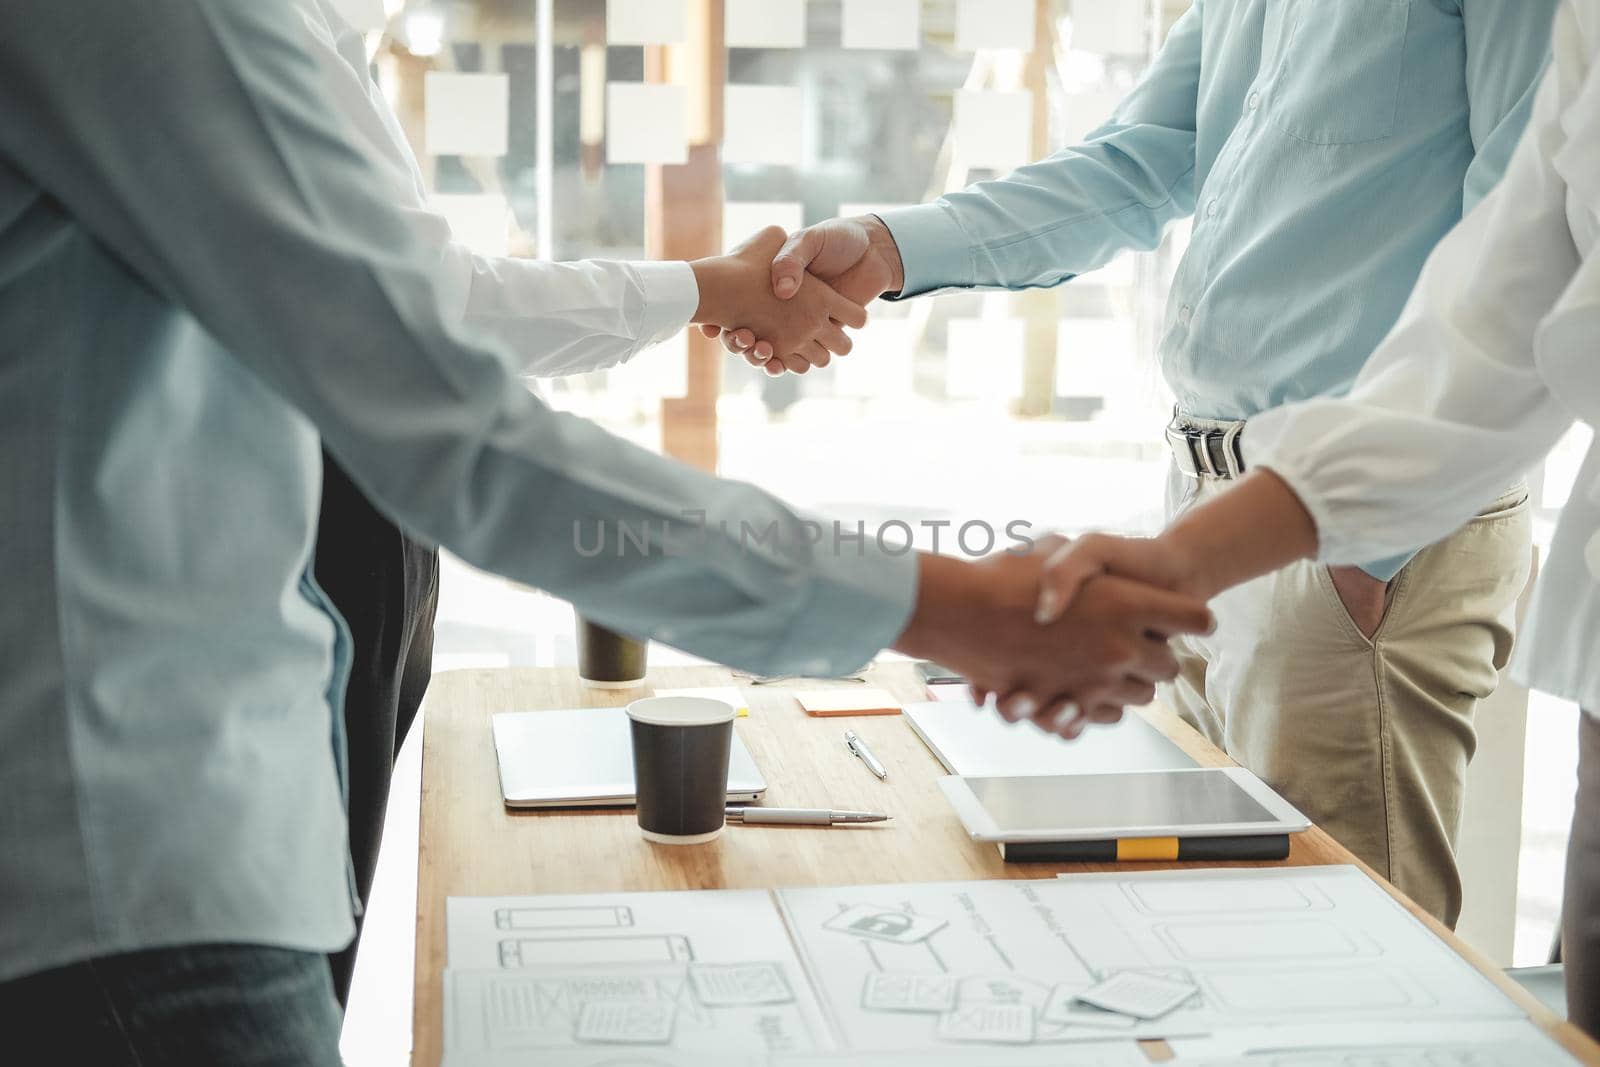 businessman shaking hands after meeting. Business people handshaking. Greeting deal, teamwork partnership  by pp99